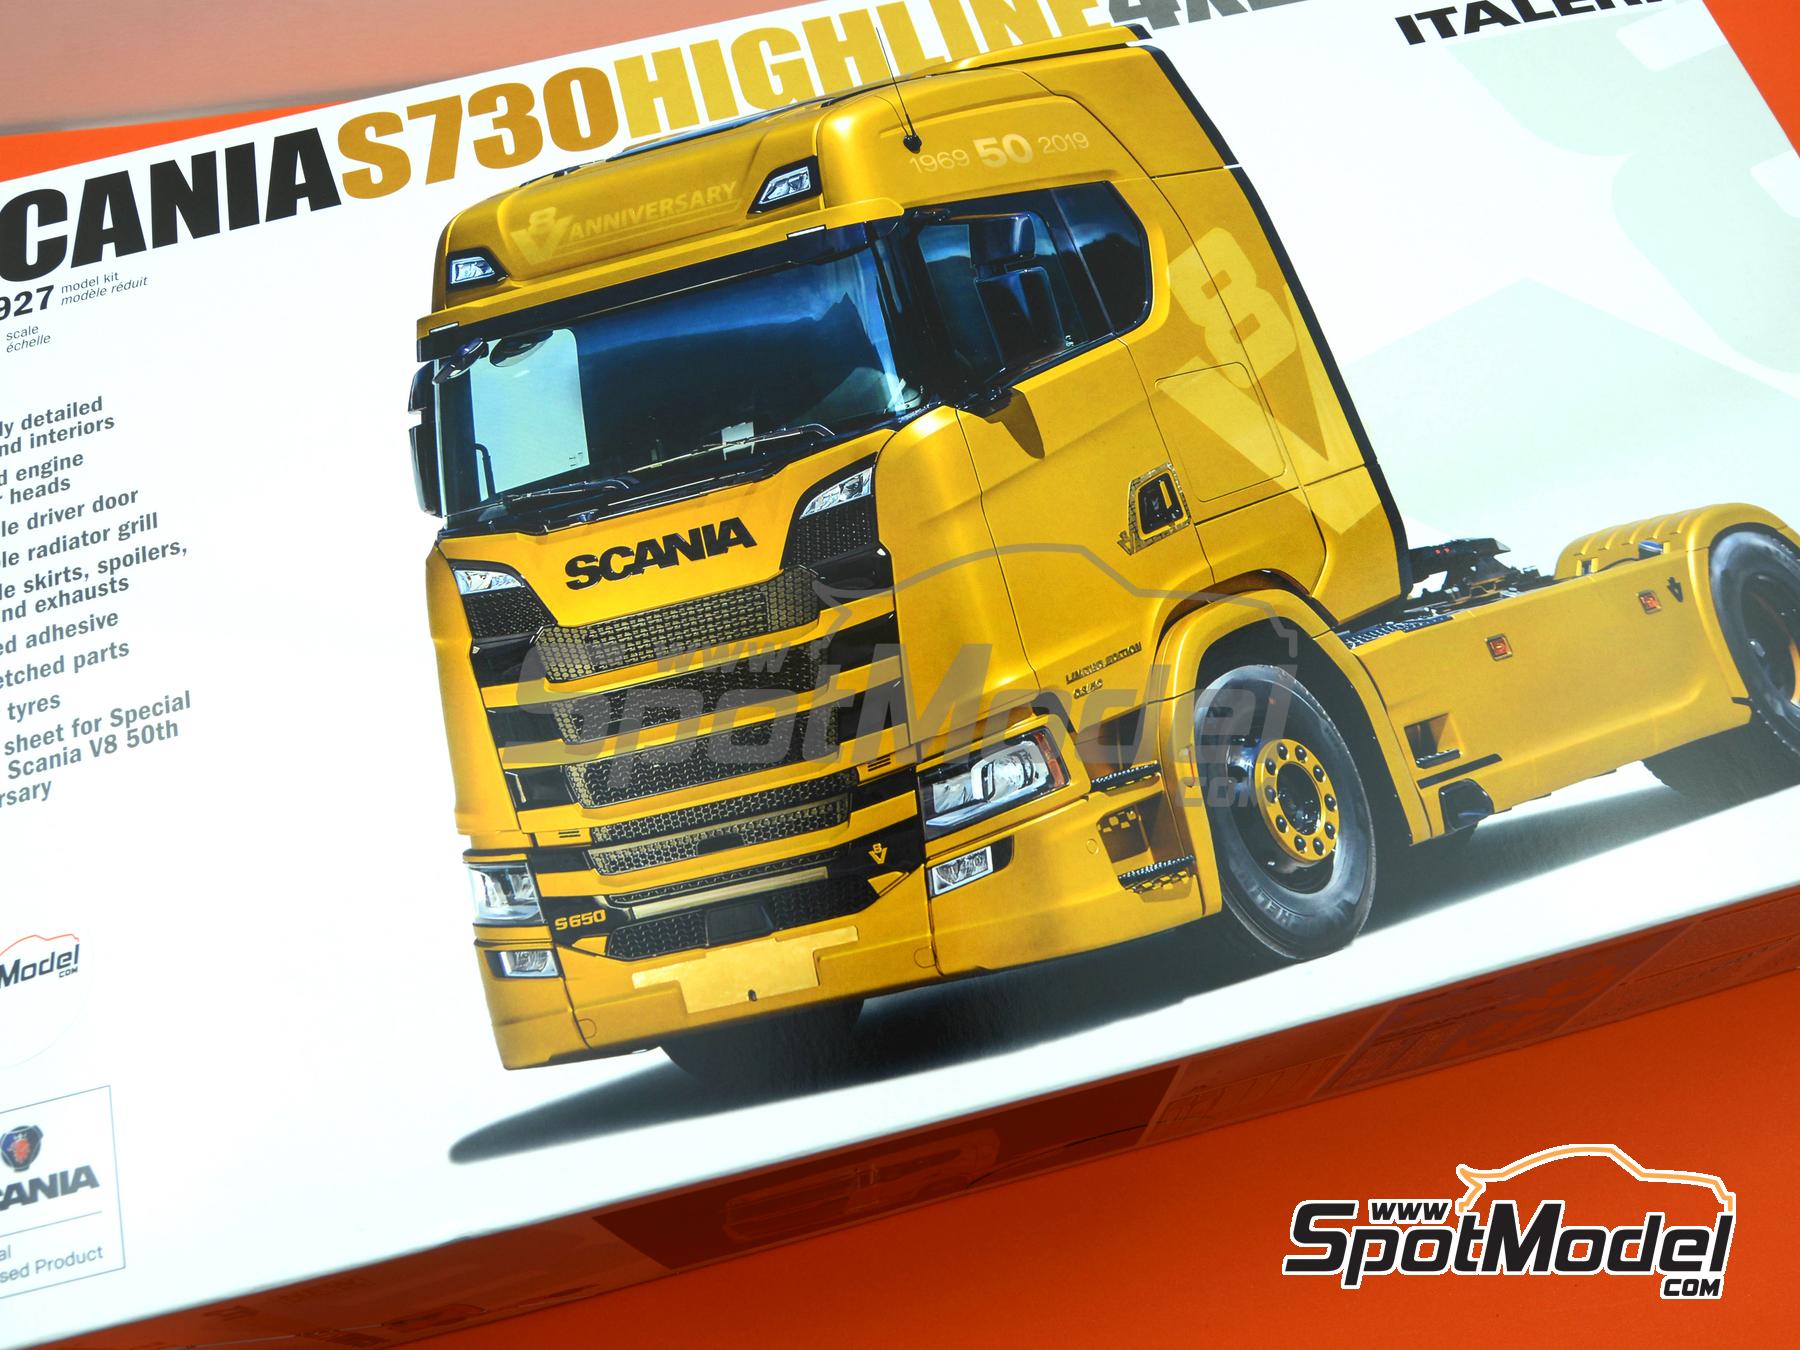 Scania S730 Highline 4x2. Tractor head scale model kit in 1/24 scale  manufactured by Italeri (ref. 3927, also 8001283039277)